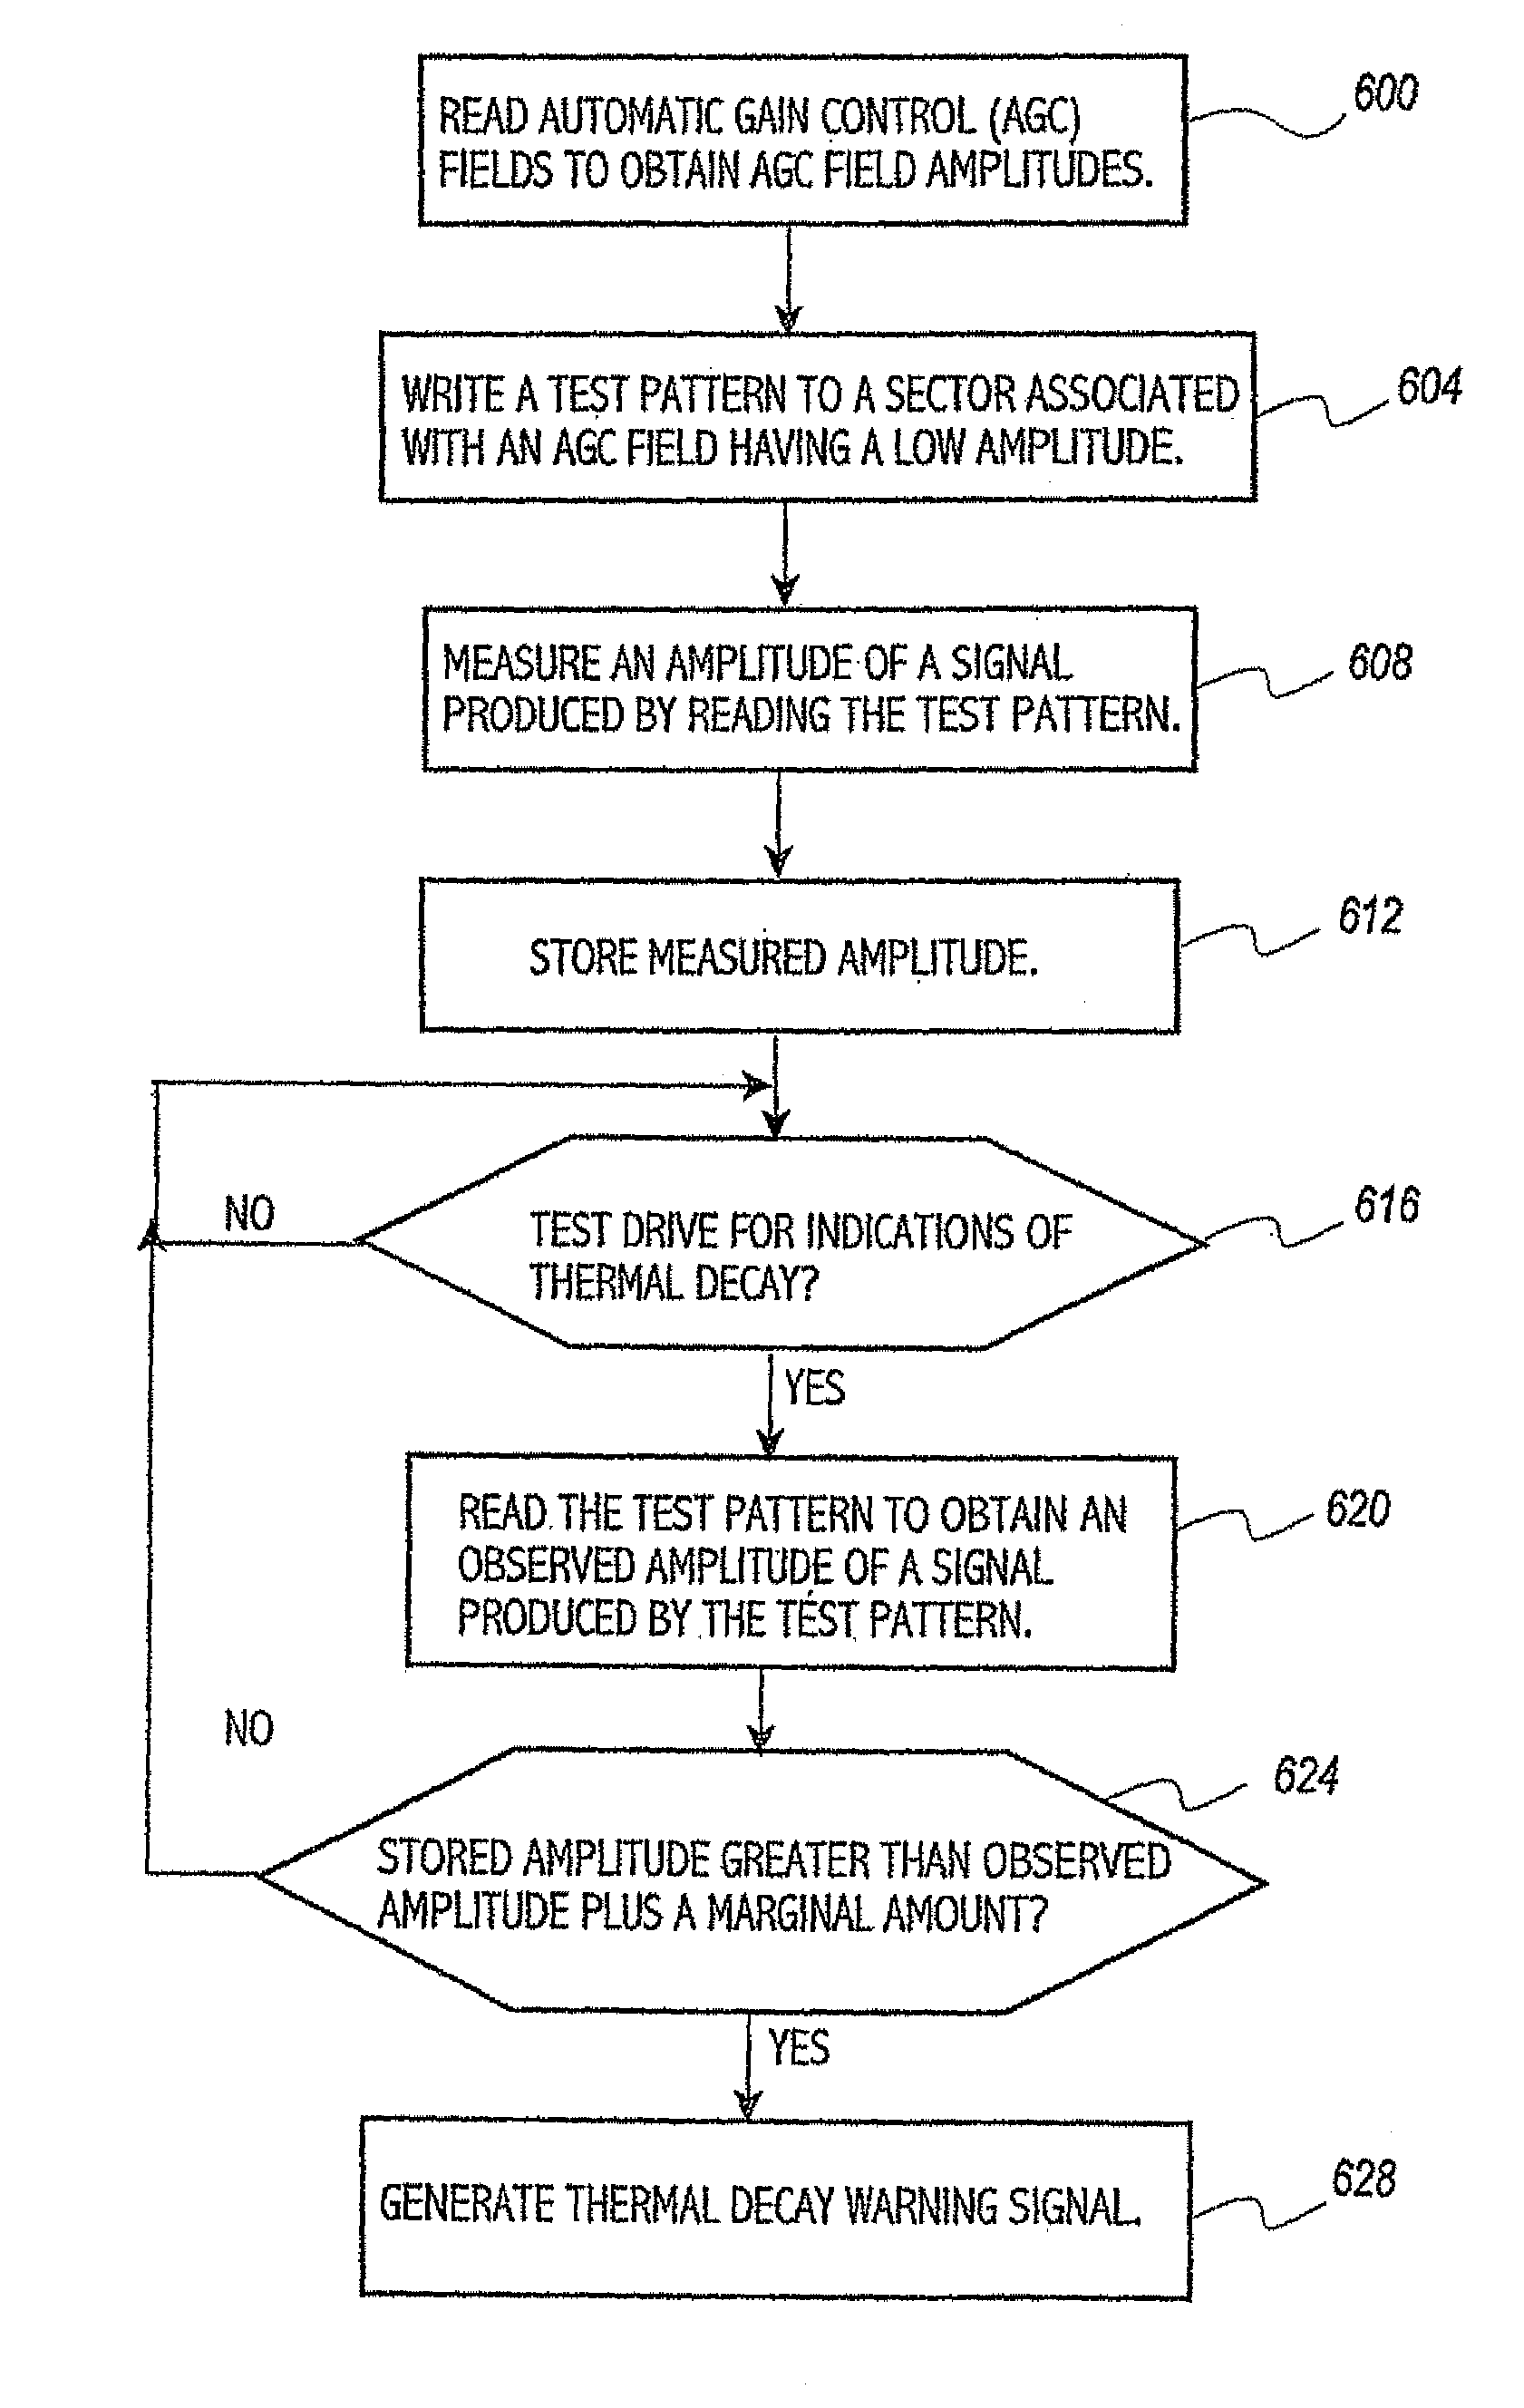 Method and apparatus for providing an early warning of thermal decay in magnetic storage devices